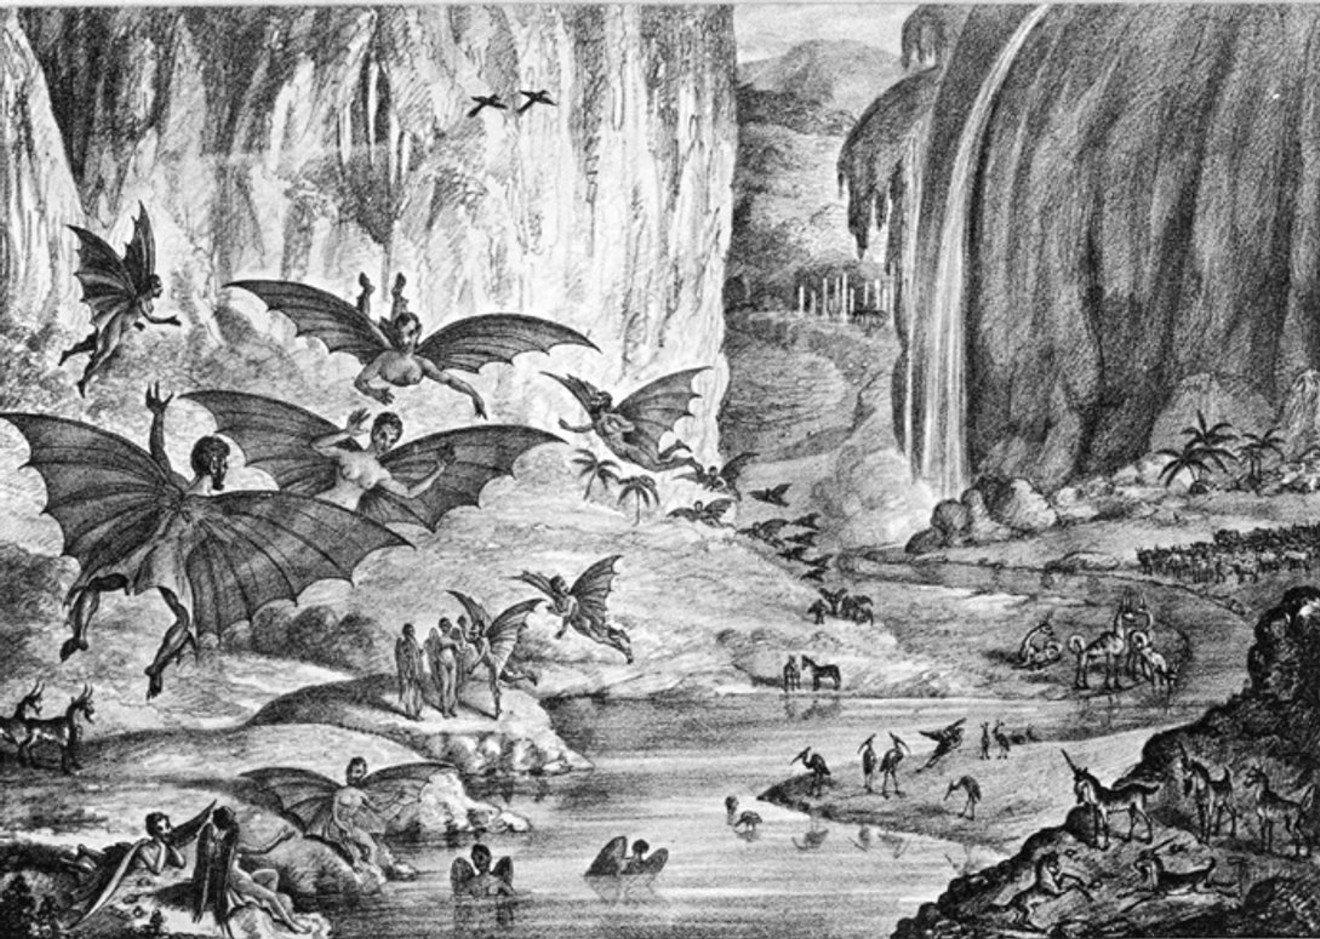 This 1835 lithograph of  flying bat-creatures from the New York Sun purportedly illustrated what a famed astronomer saw on the surface of the moon through a powerful telescope.